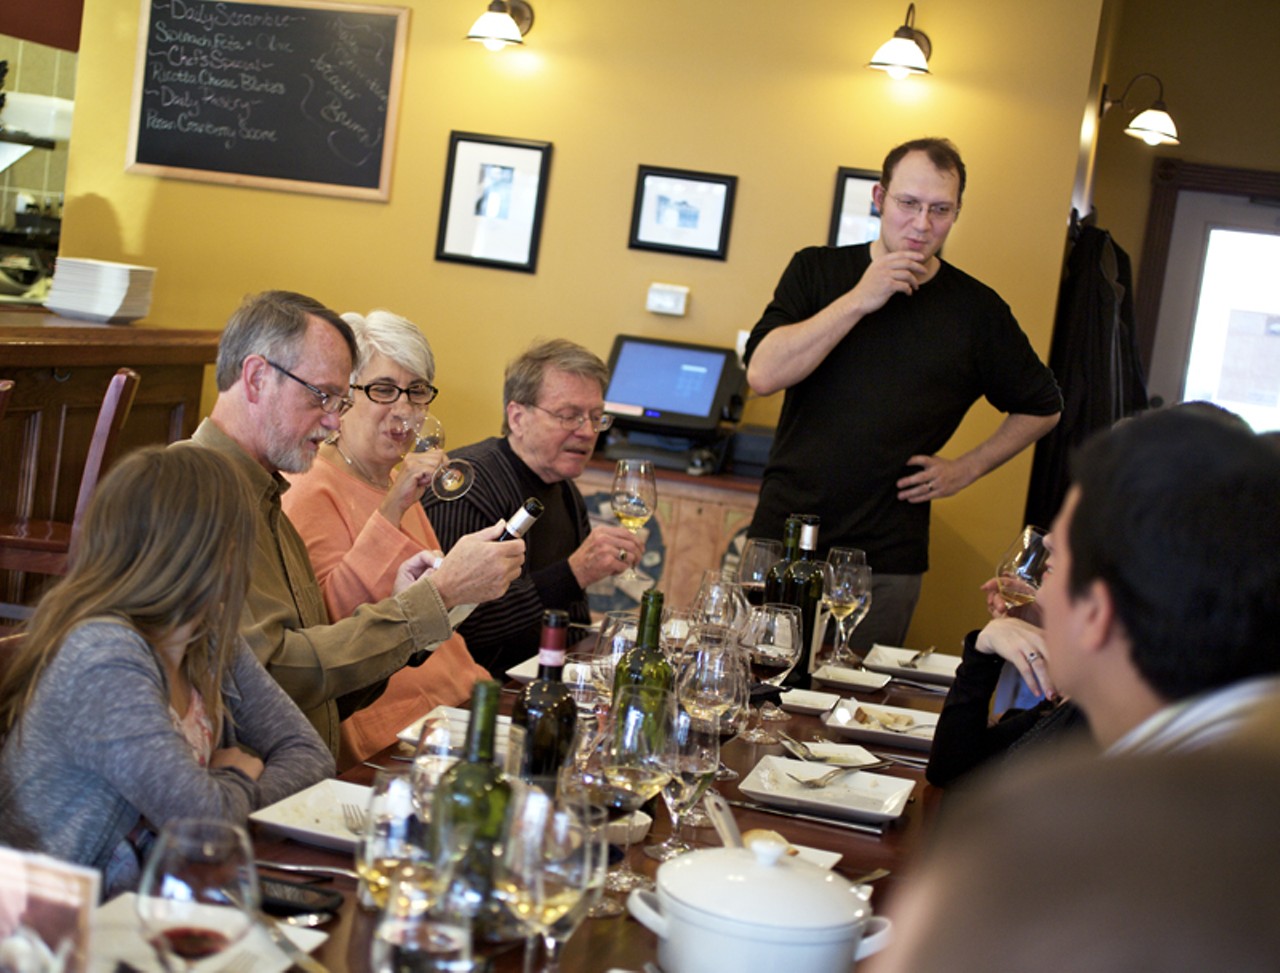 Bartender and wine educator Joshua Renbarger discusses the evenings wine choices with supper club guests.